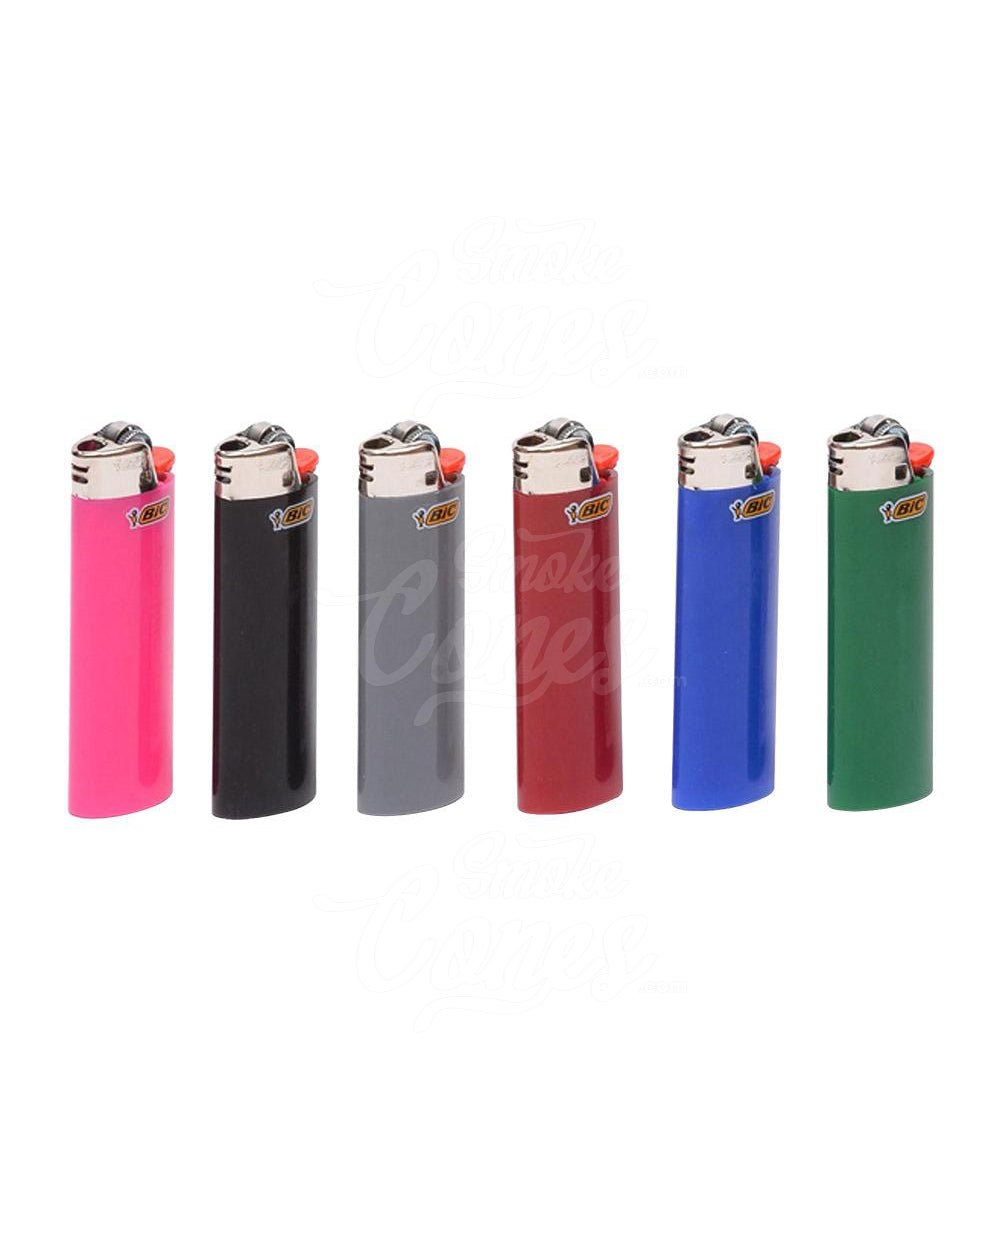 Briquet Clipper Hey There x 48 - 39,90€